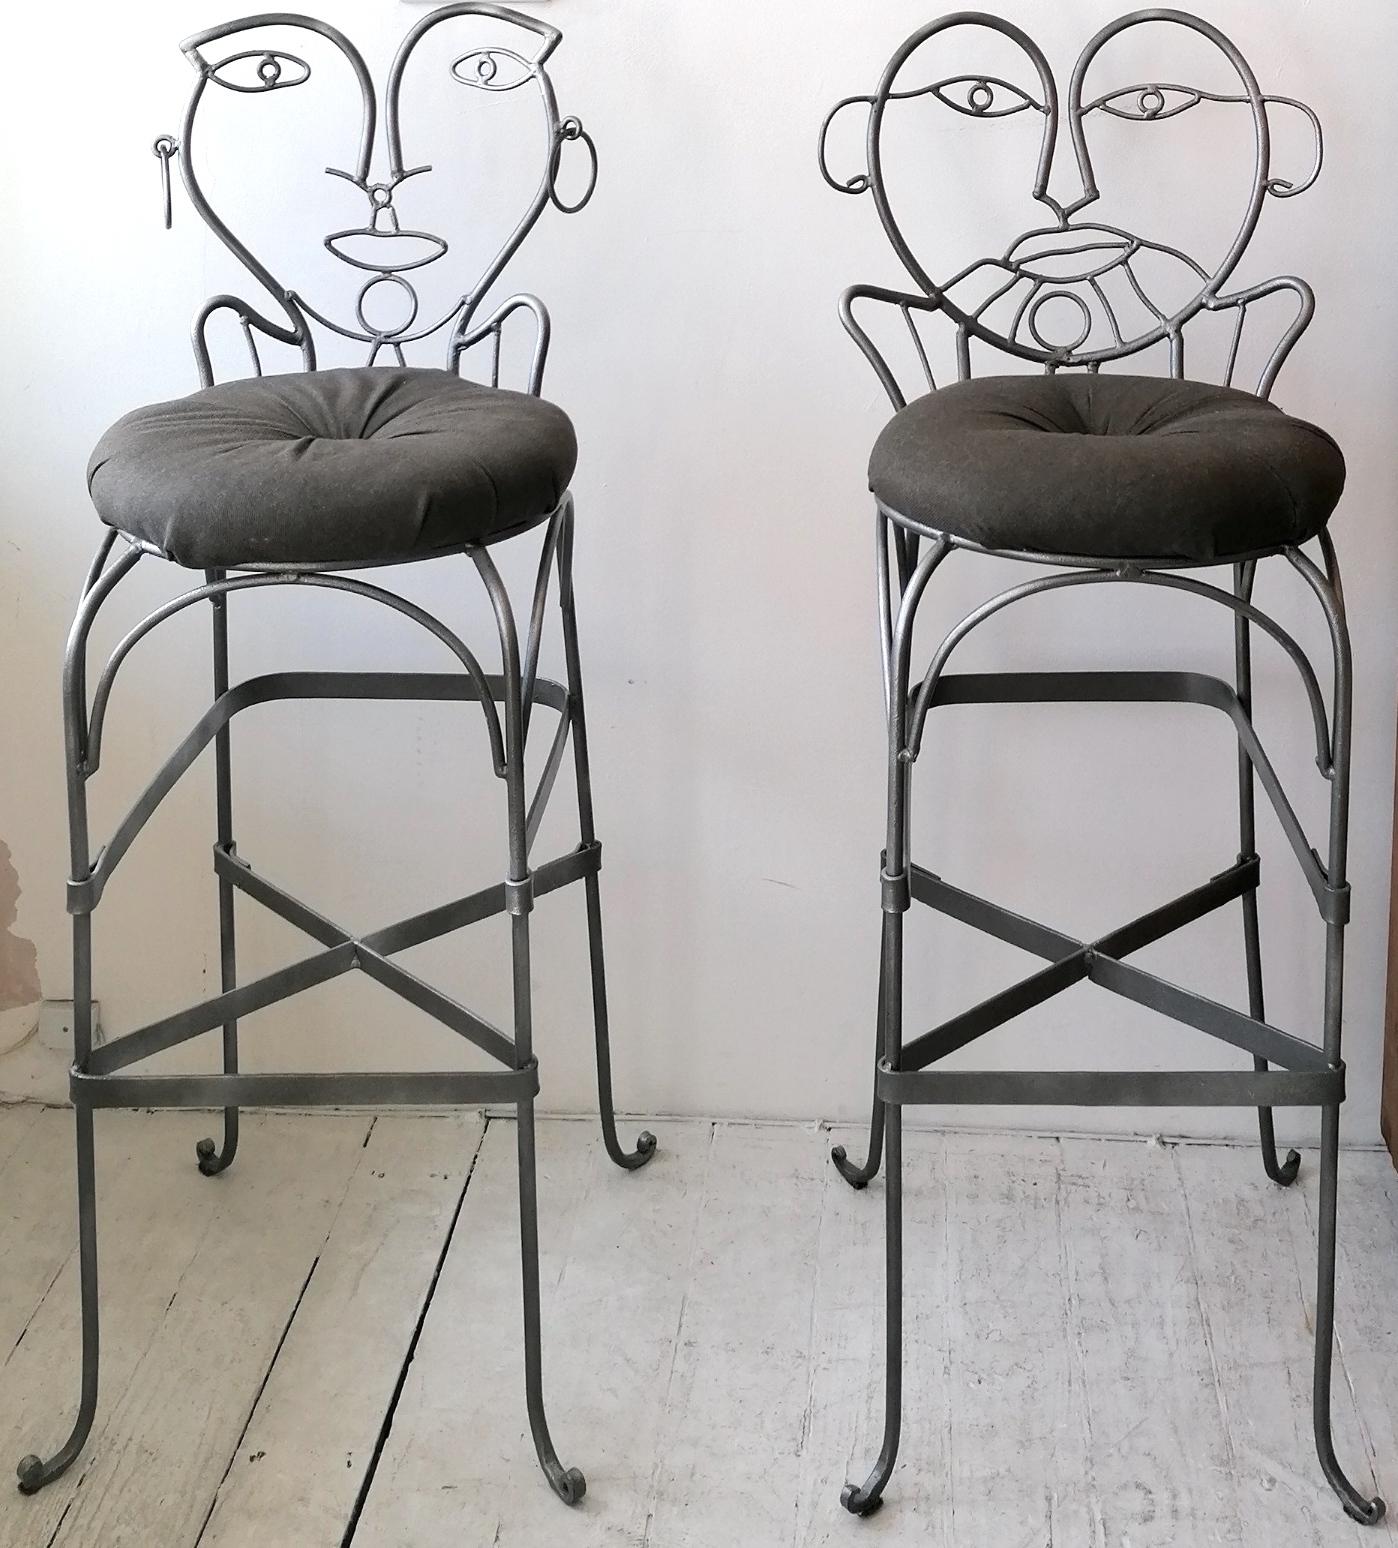 A rare pair of whimsical figural John Risley style dark silver coloured wrought iron bar stools, USA 1970s / 80s. One male, one female ??
With original charcoal seat pads.

Dimensions : width 45cm, depth 46cm, height 114cm, seat height 81cm